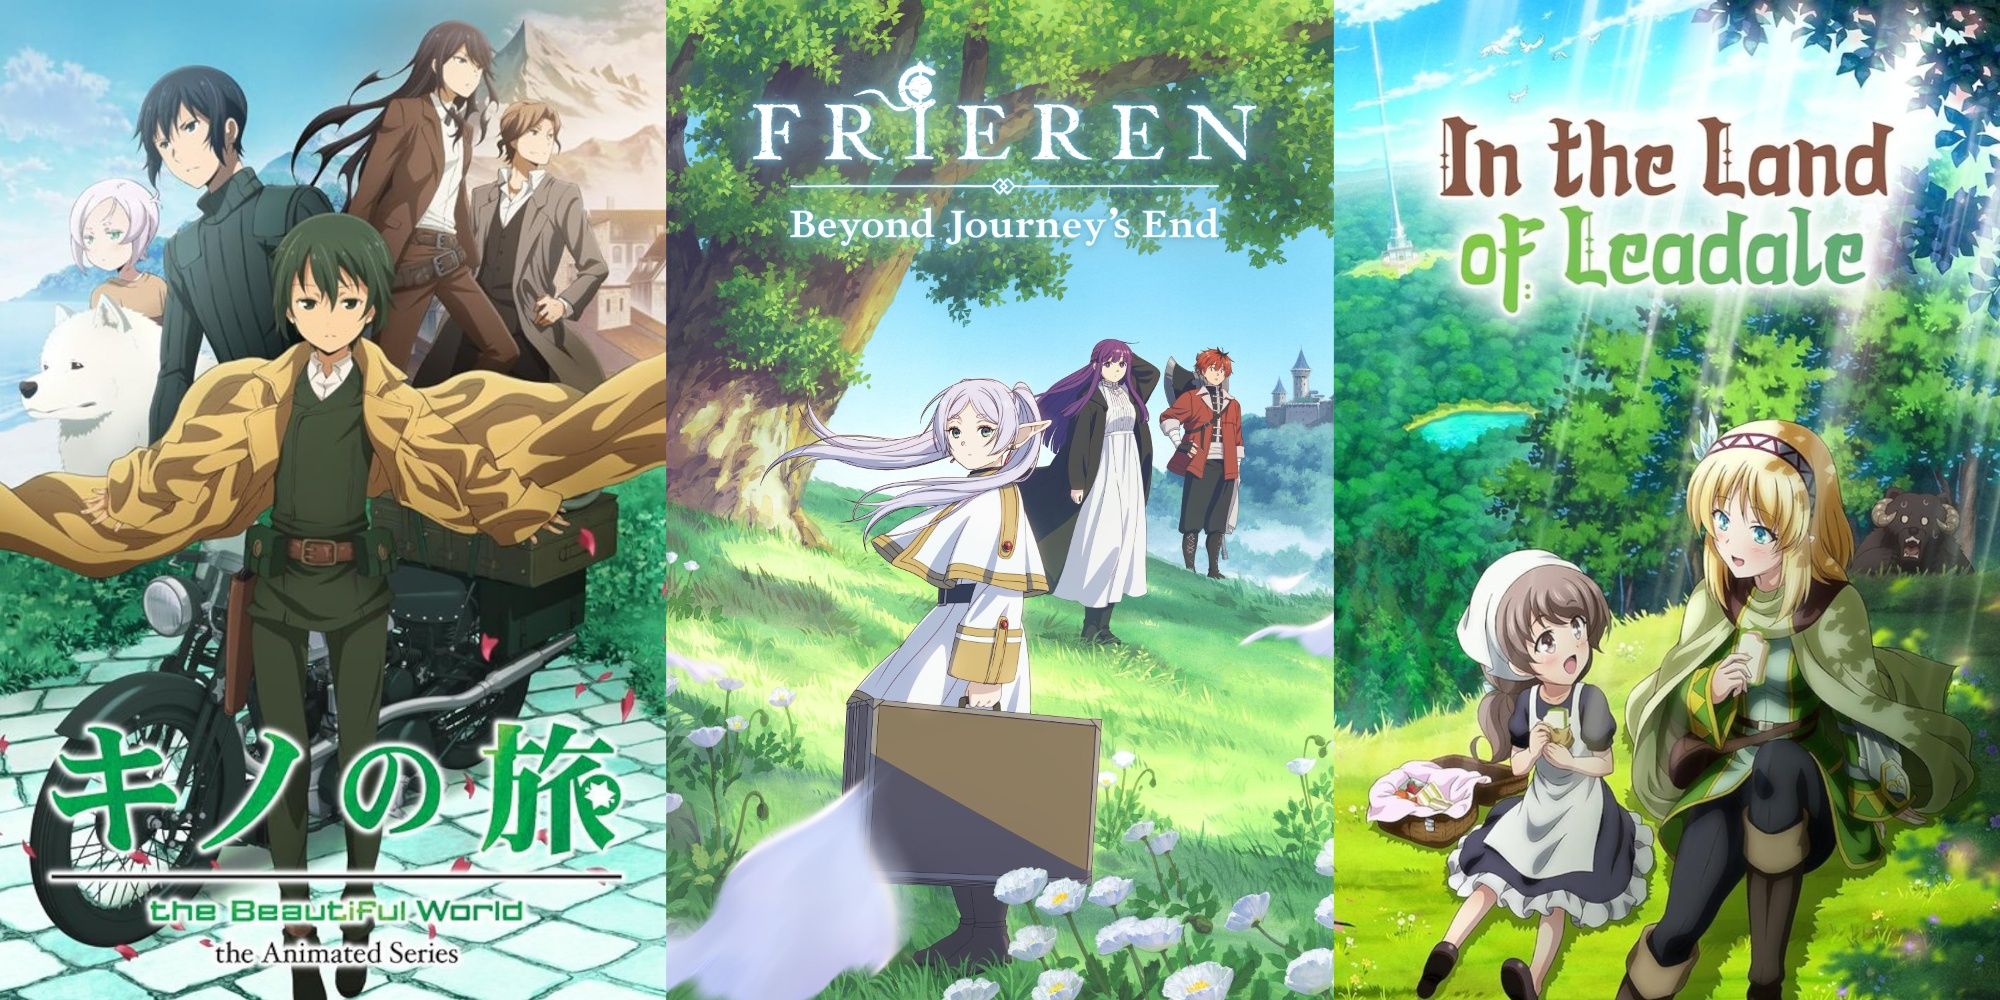 Best Anime To Watch If You Like Frieren: Beyond Journey’s End featured image 